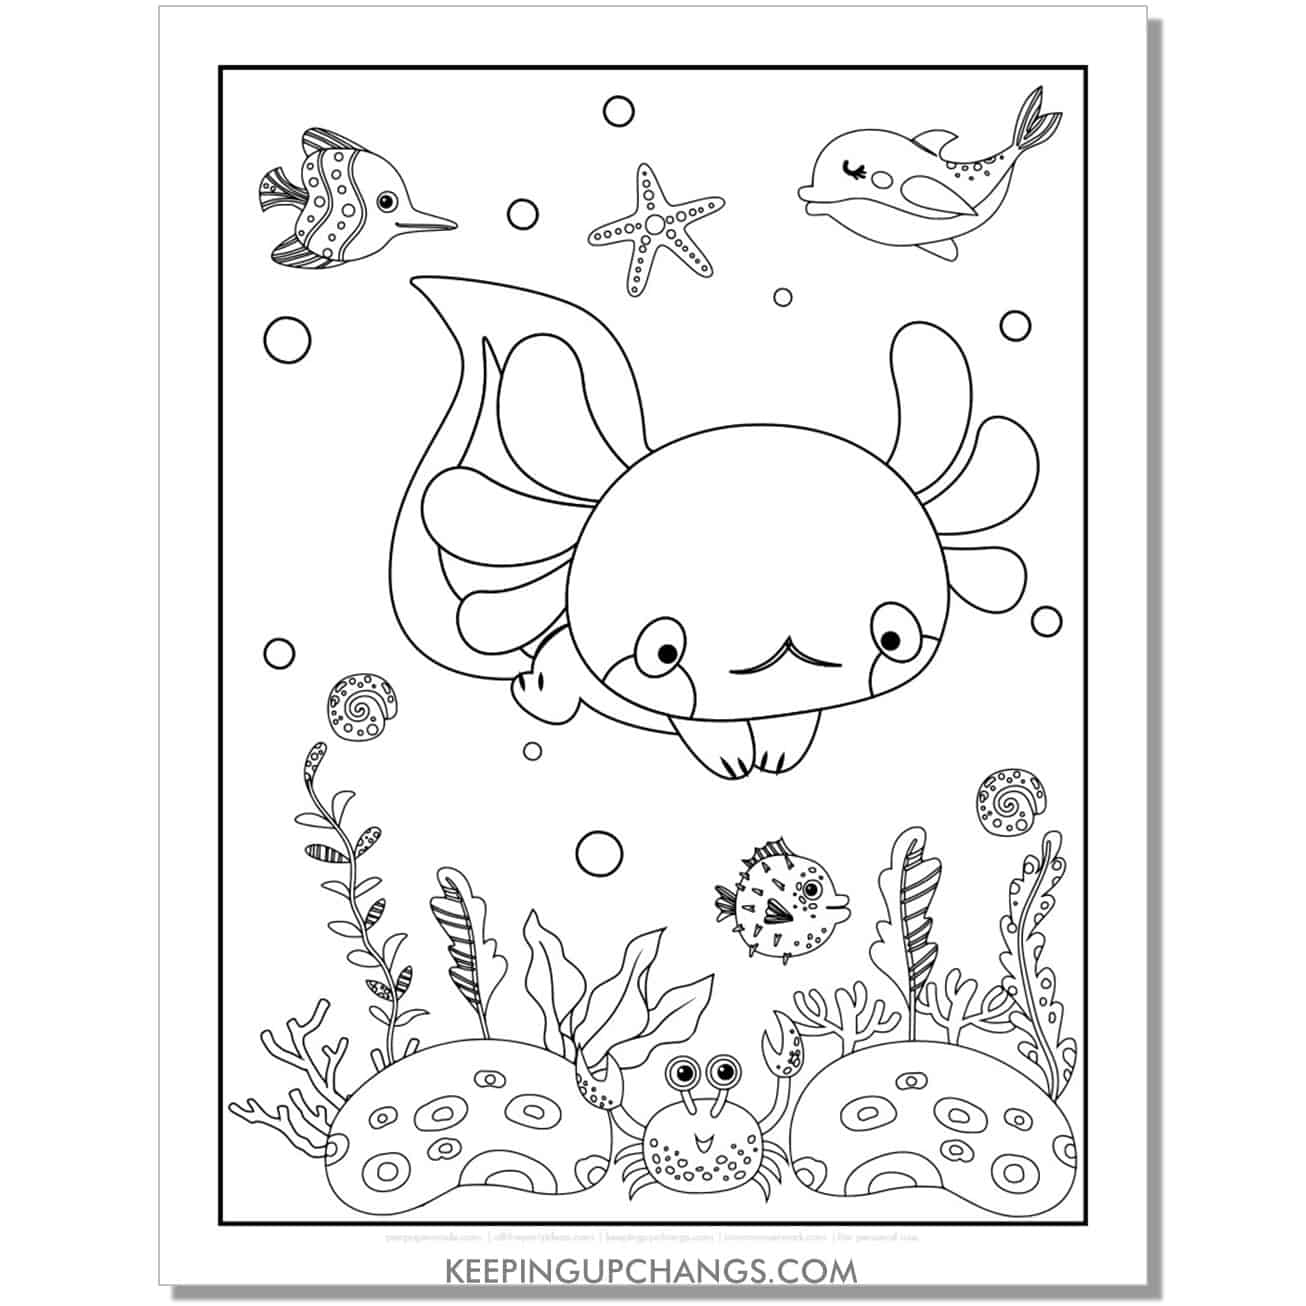 free swimming axolotl coloring page with pufferfish, dolphin crab.